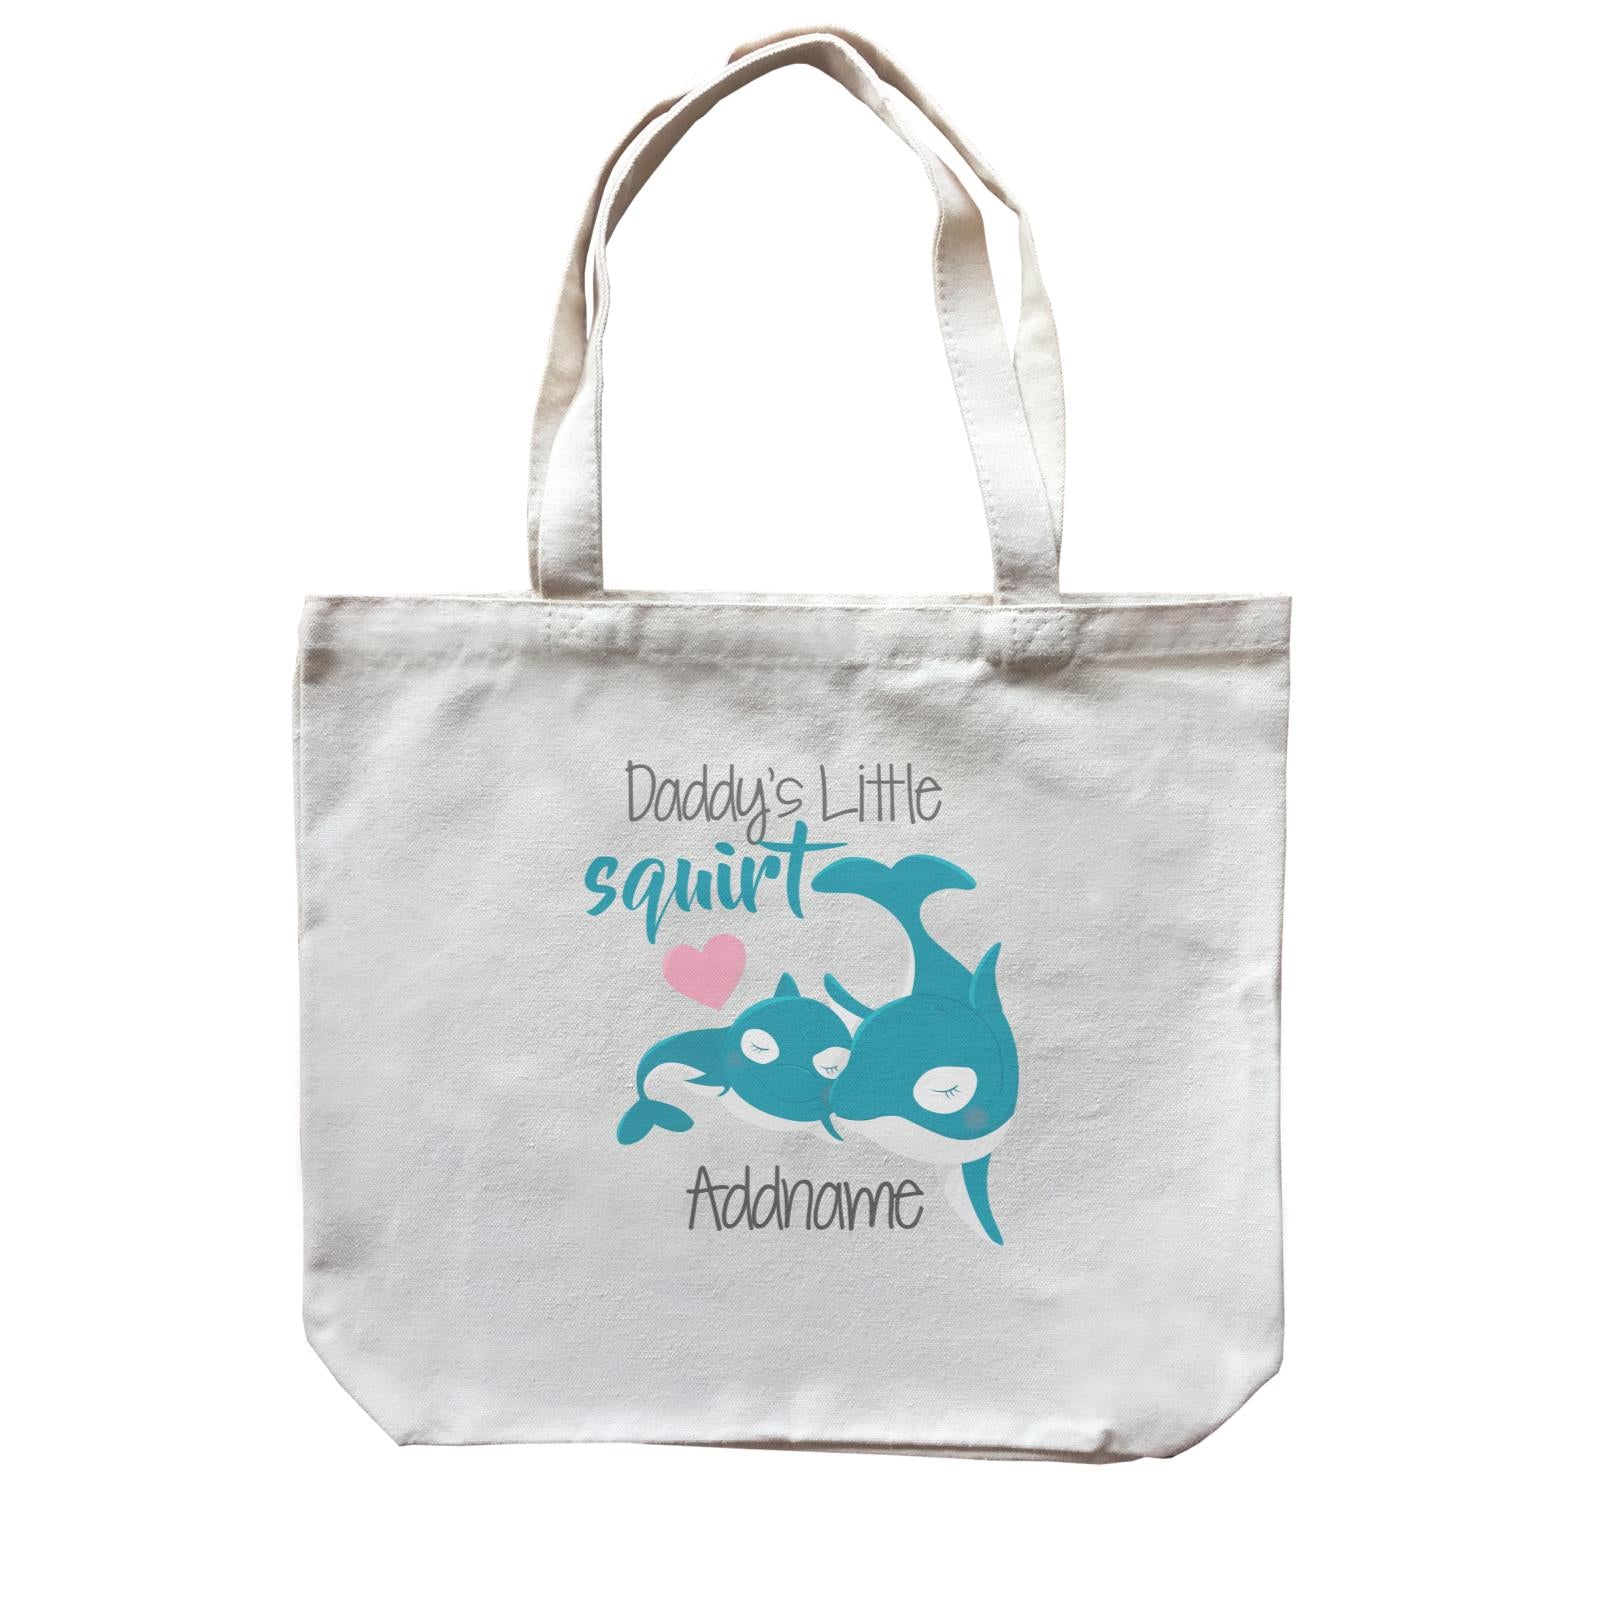 Animal & Loved Ones Daddy's Little Squirt Dolphin Father and Son Addname Canvas Bag